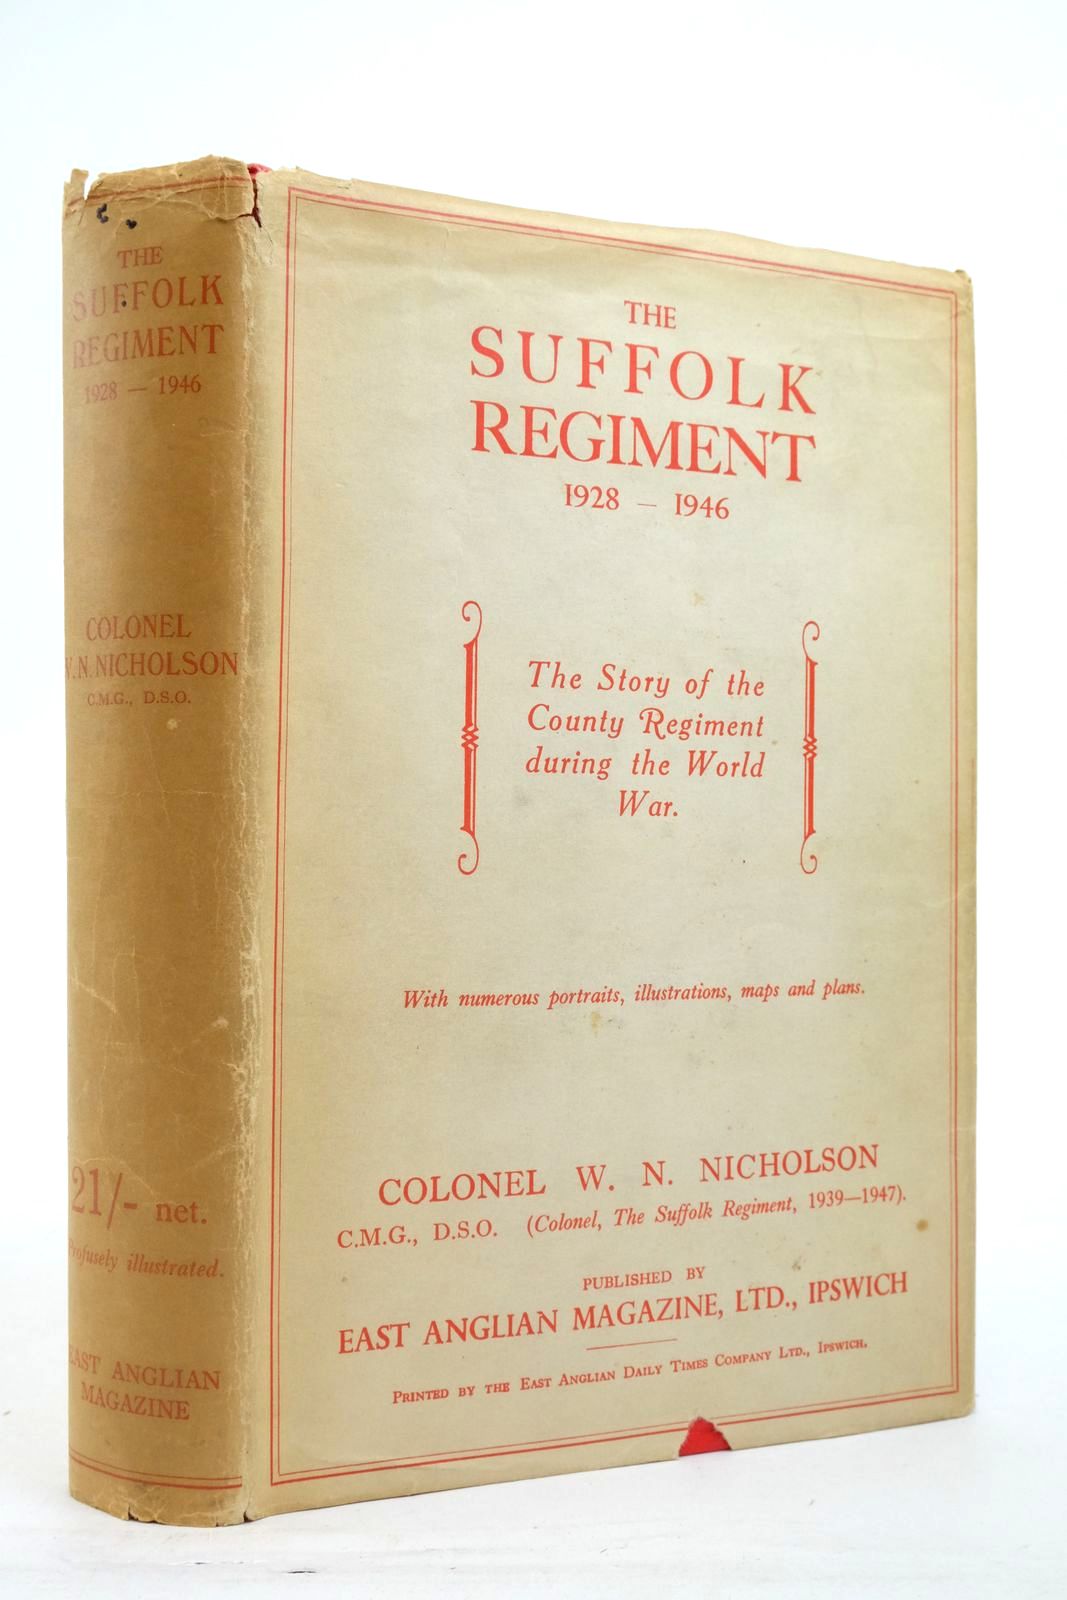 Photo of THE HISTORY OF THE SUFFOLK REGIMENT 1928 TO 1946 written by Nicholson, Col. W.N. published by East Anglian Magazine Ltd. (STOCK CODE: 2137548)  for sale by Stella & Rose's Books